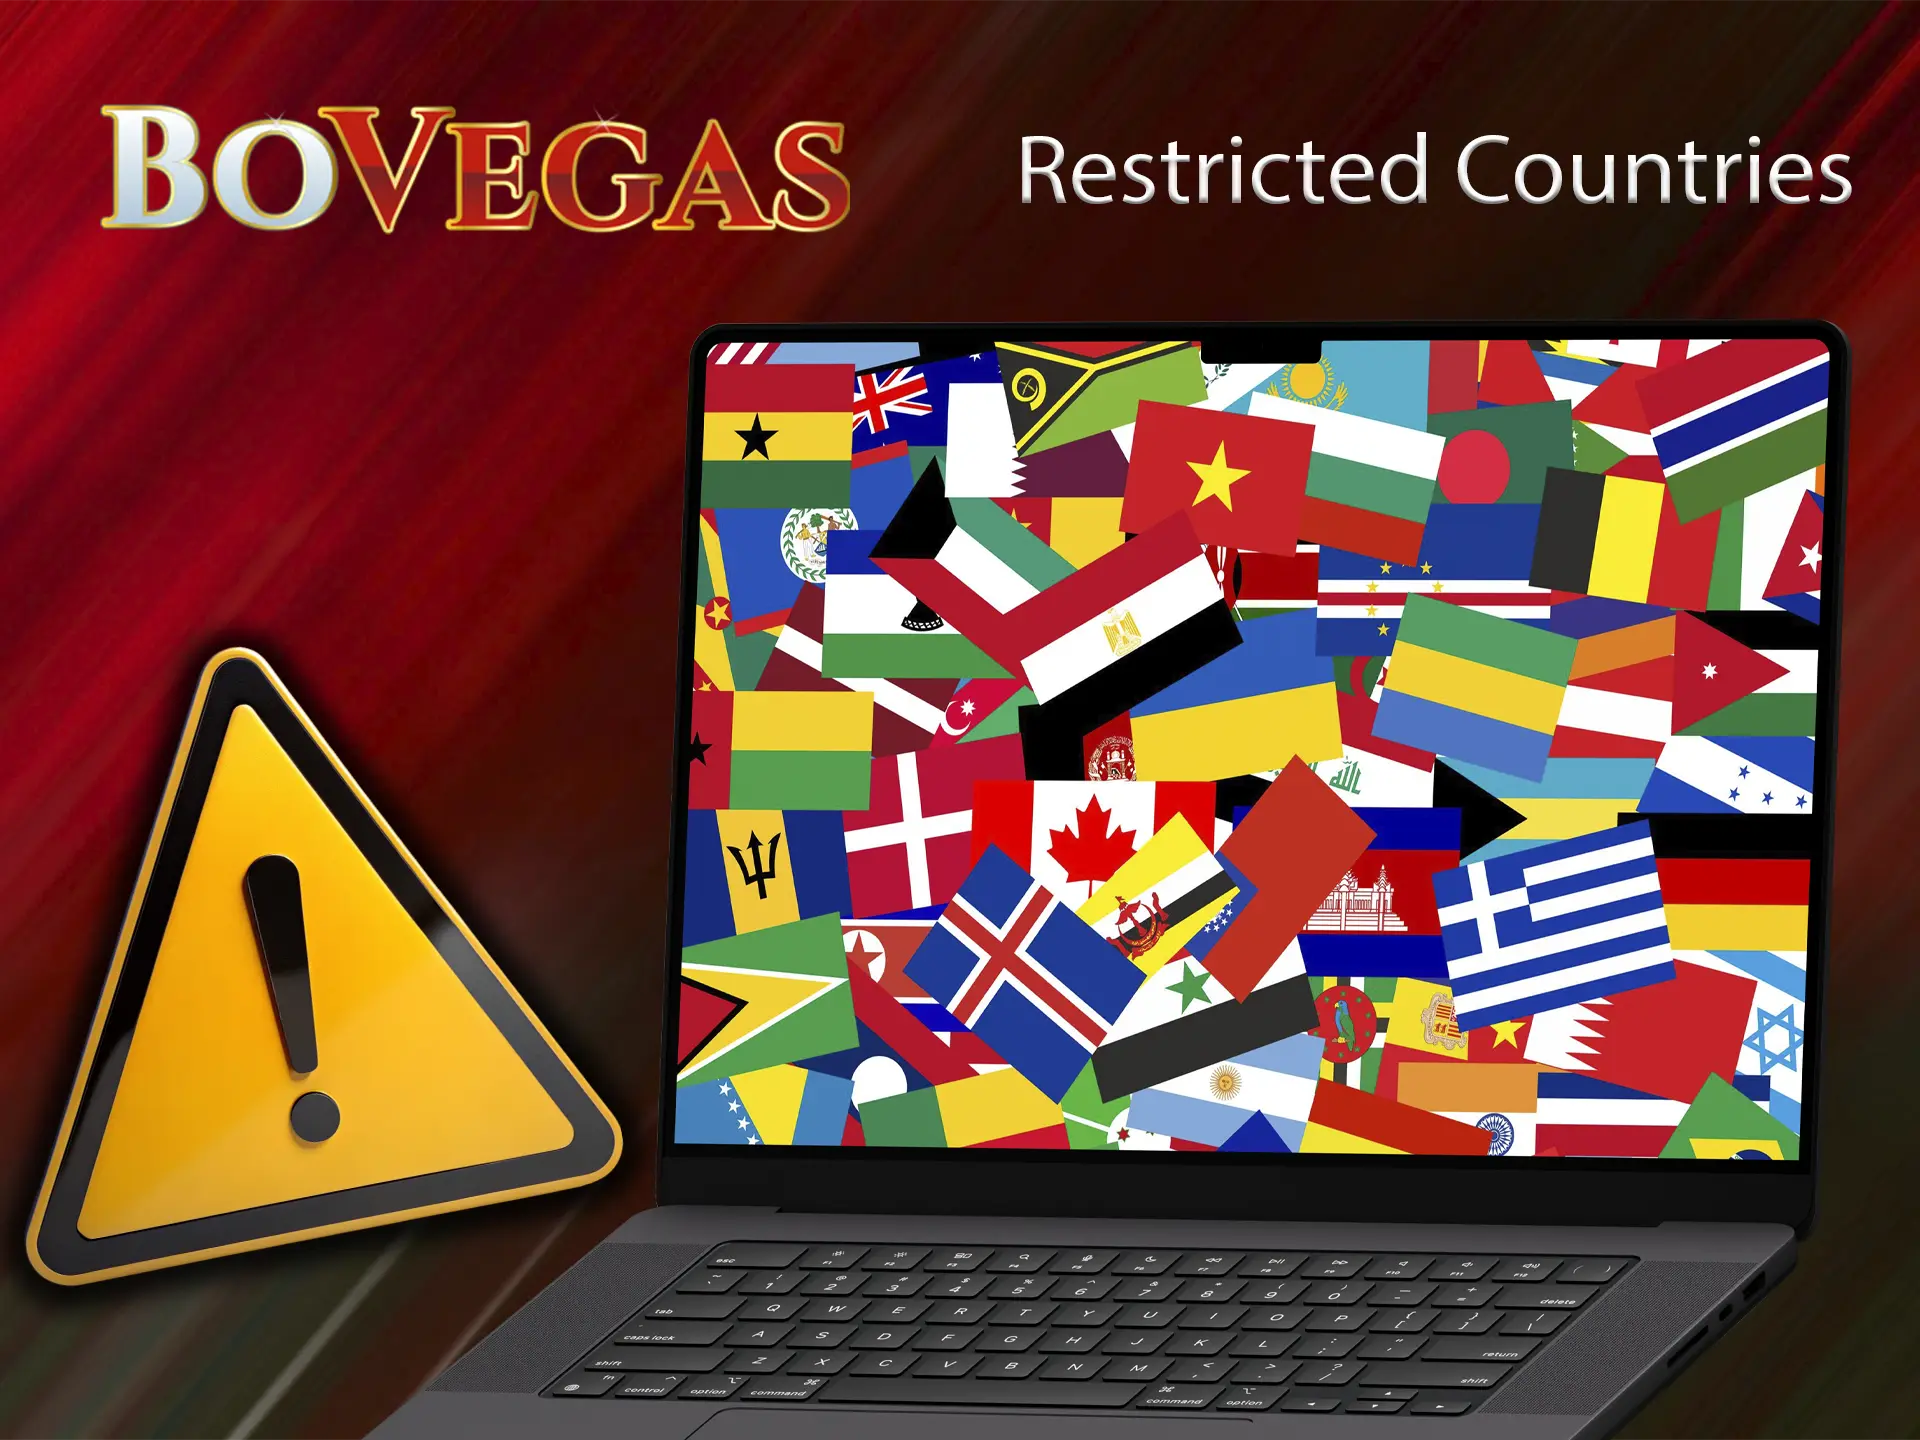 In some countries BoVegas Casino is restricted.